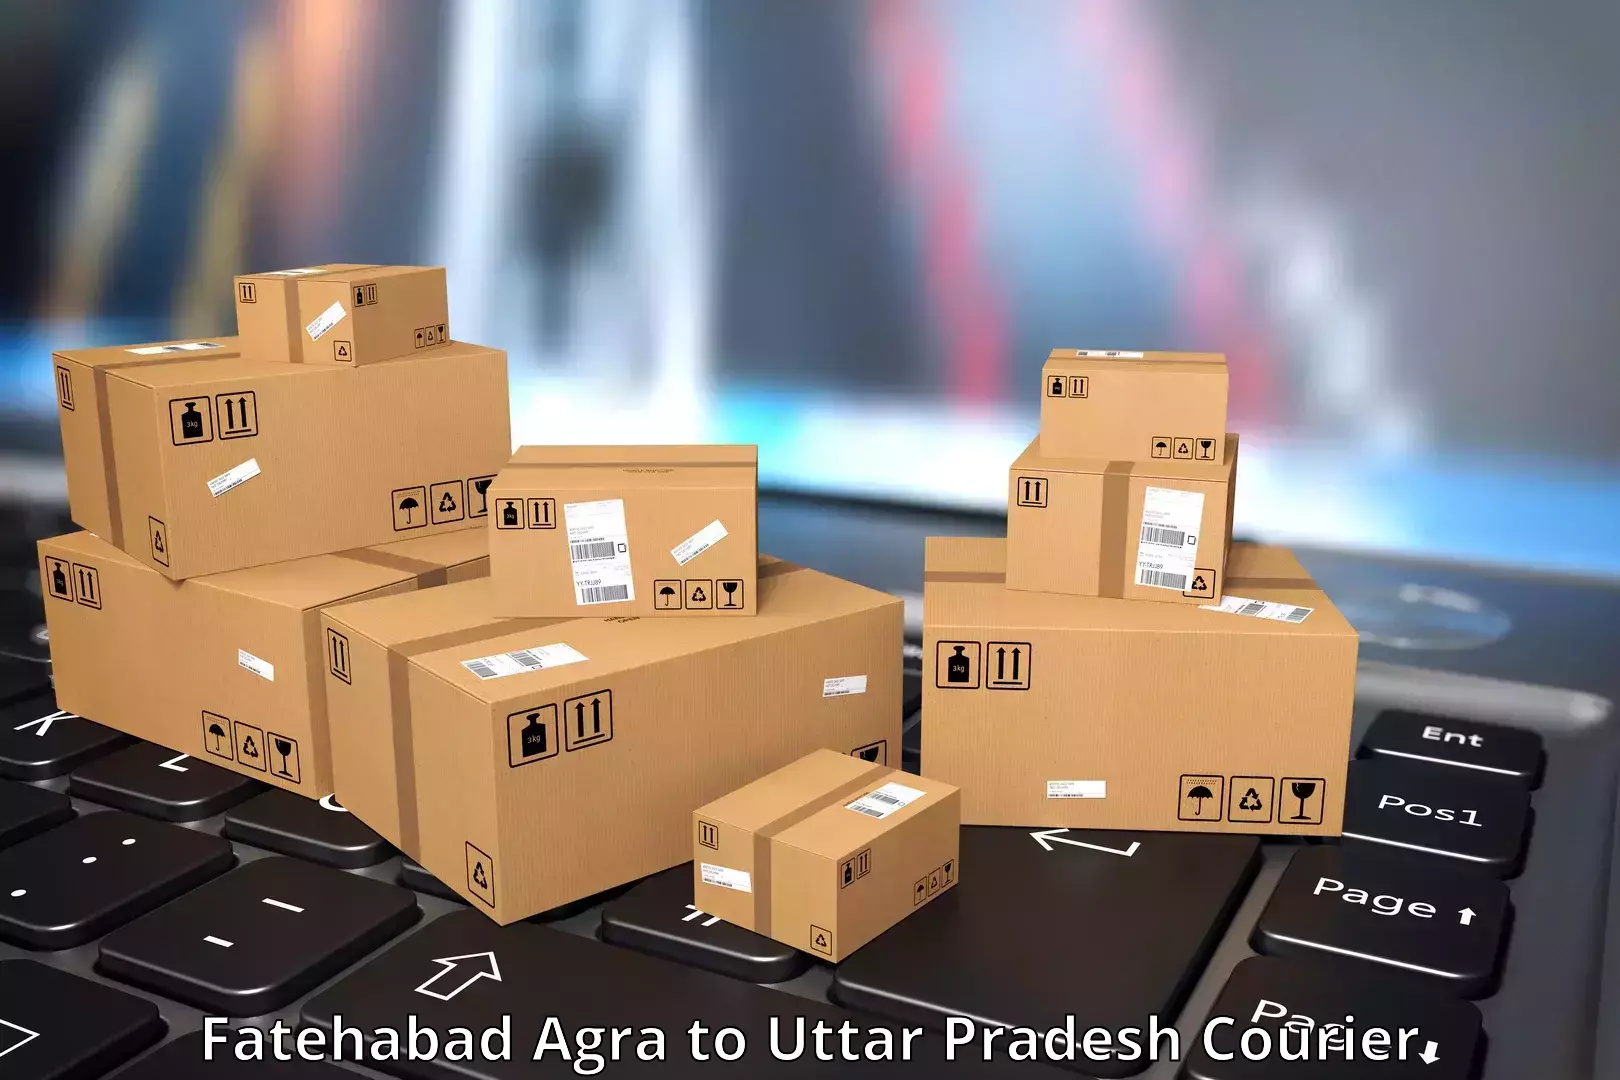 High-speed parcel service Fatehabad Agra to Sikandara